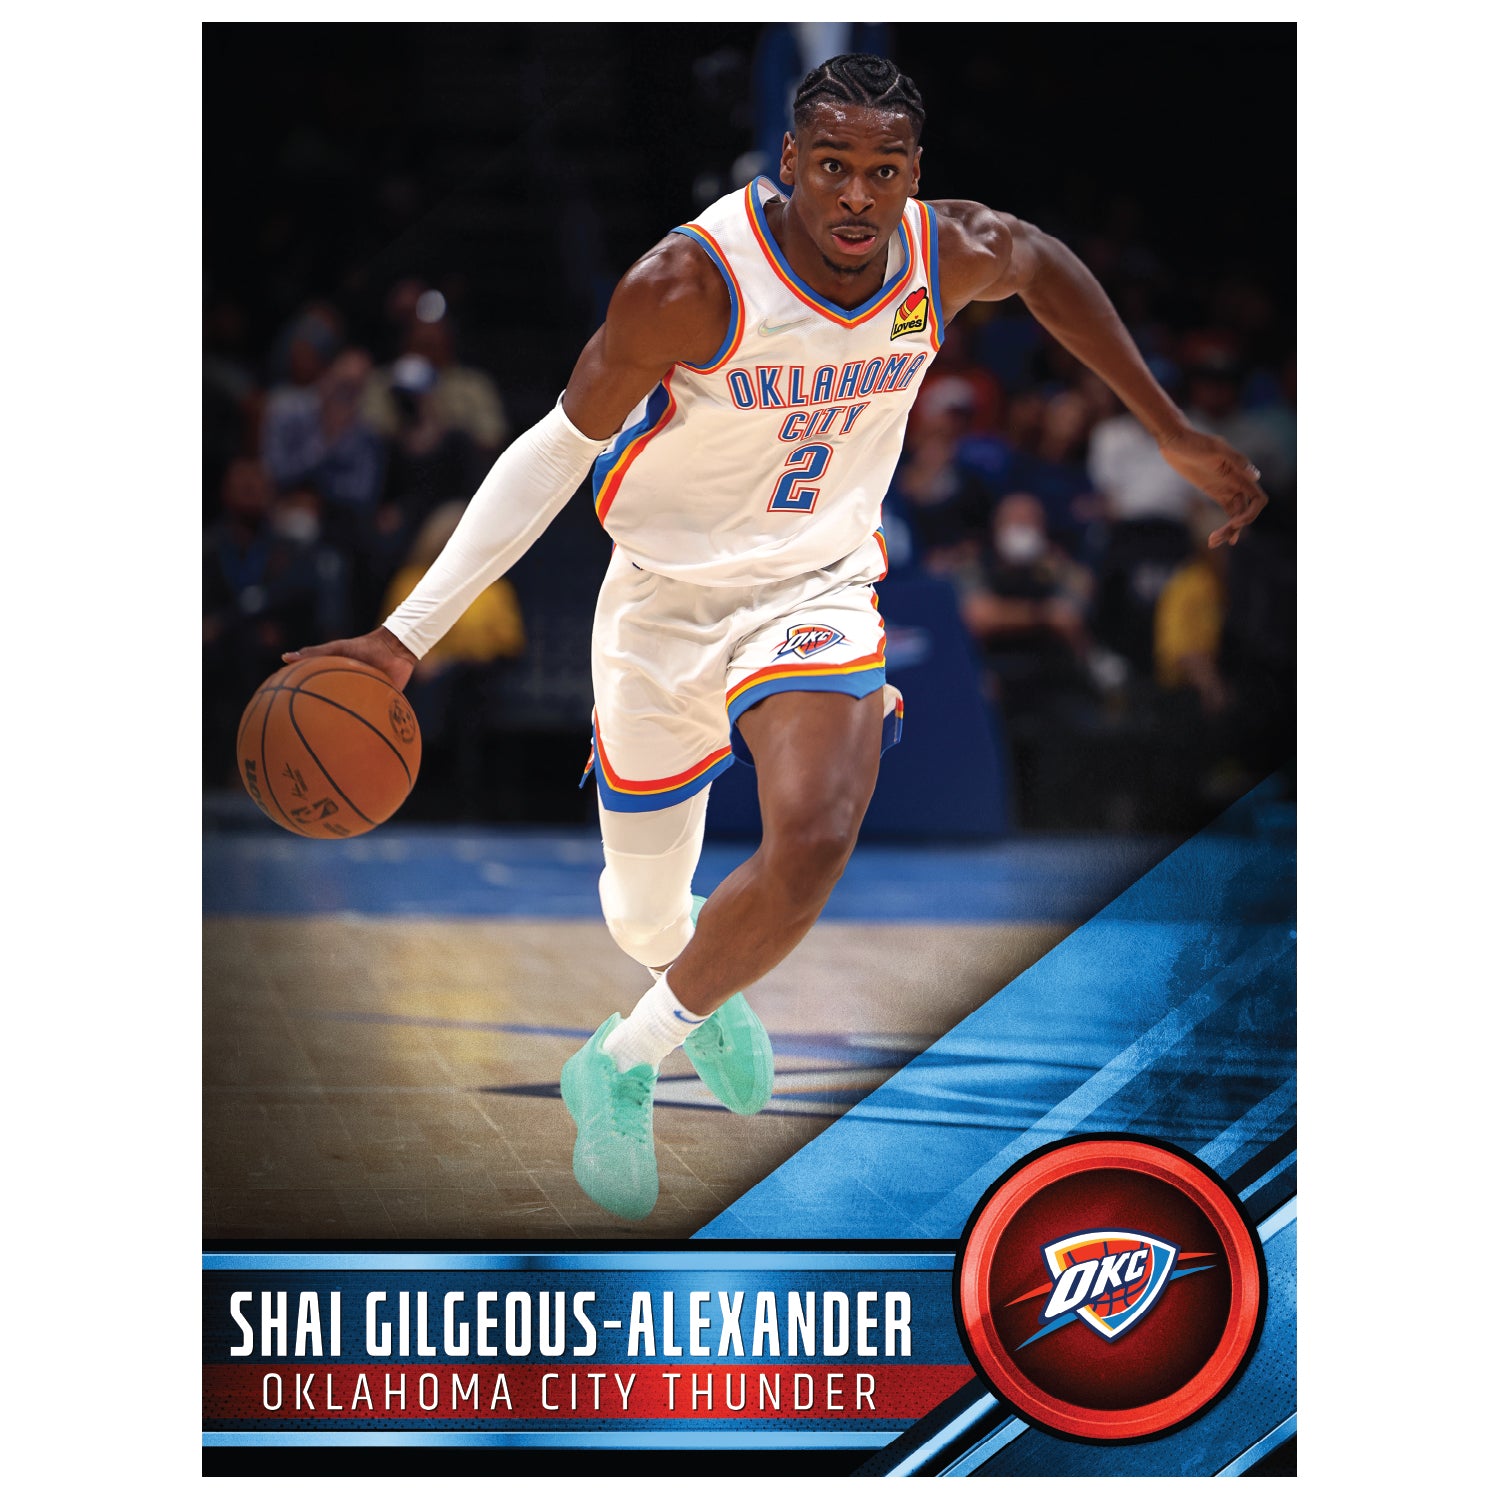 Shai Gilgeous-Alexander is officially one of the NBA's best young